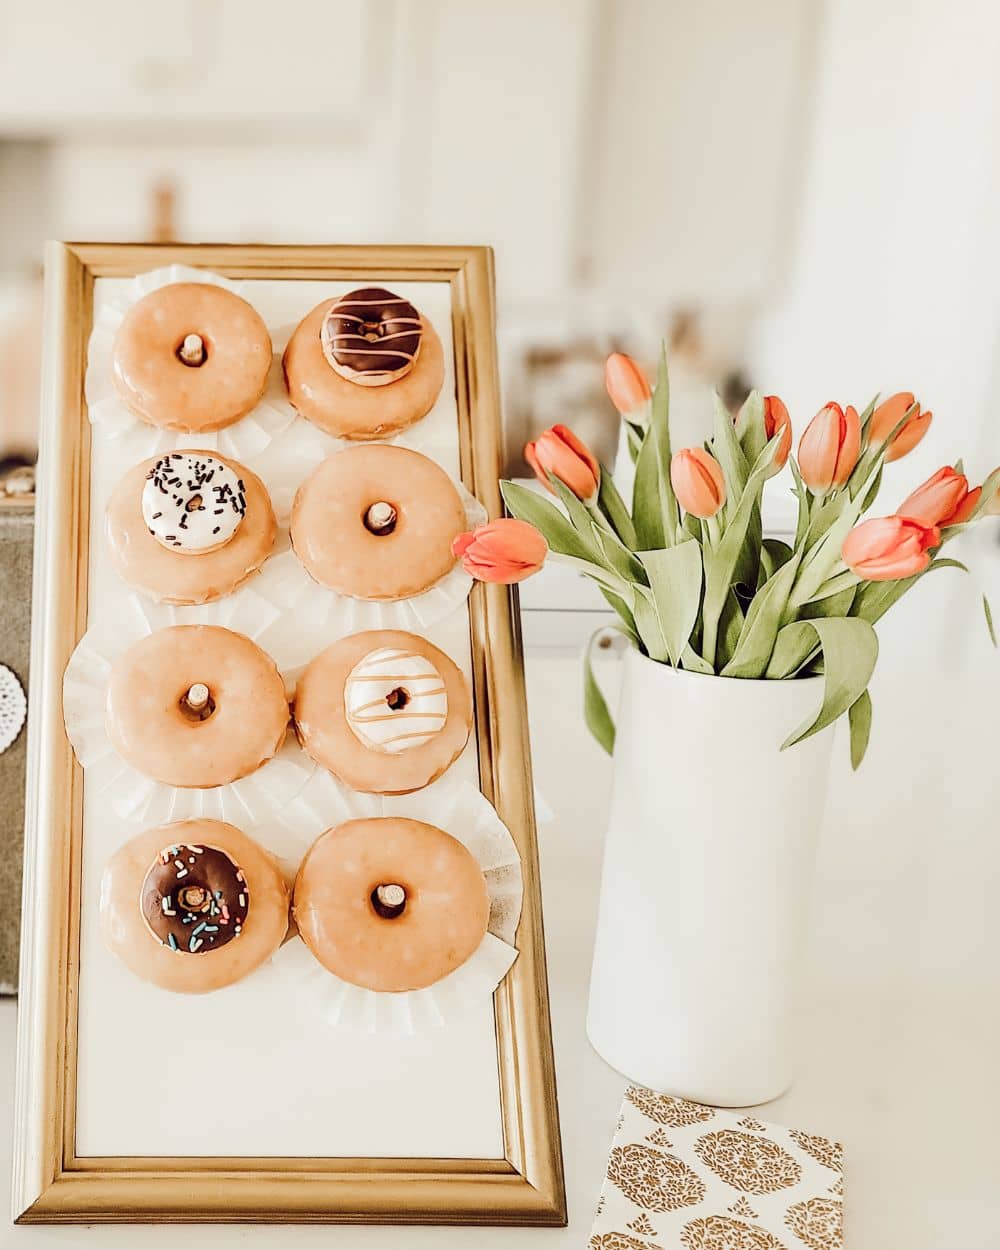 A DIY donut board in a vintage frame with a vase of tulips